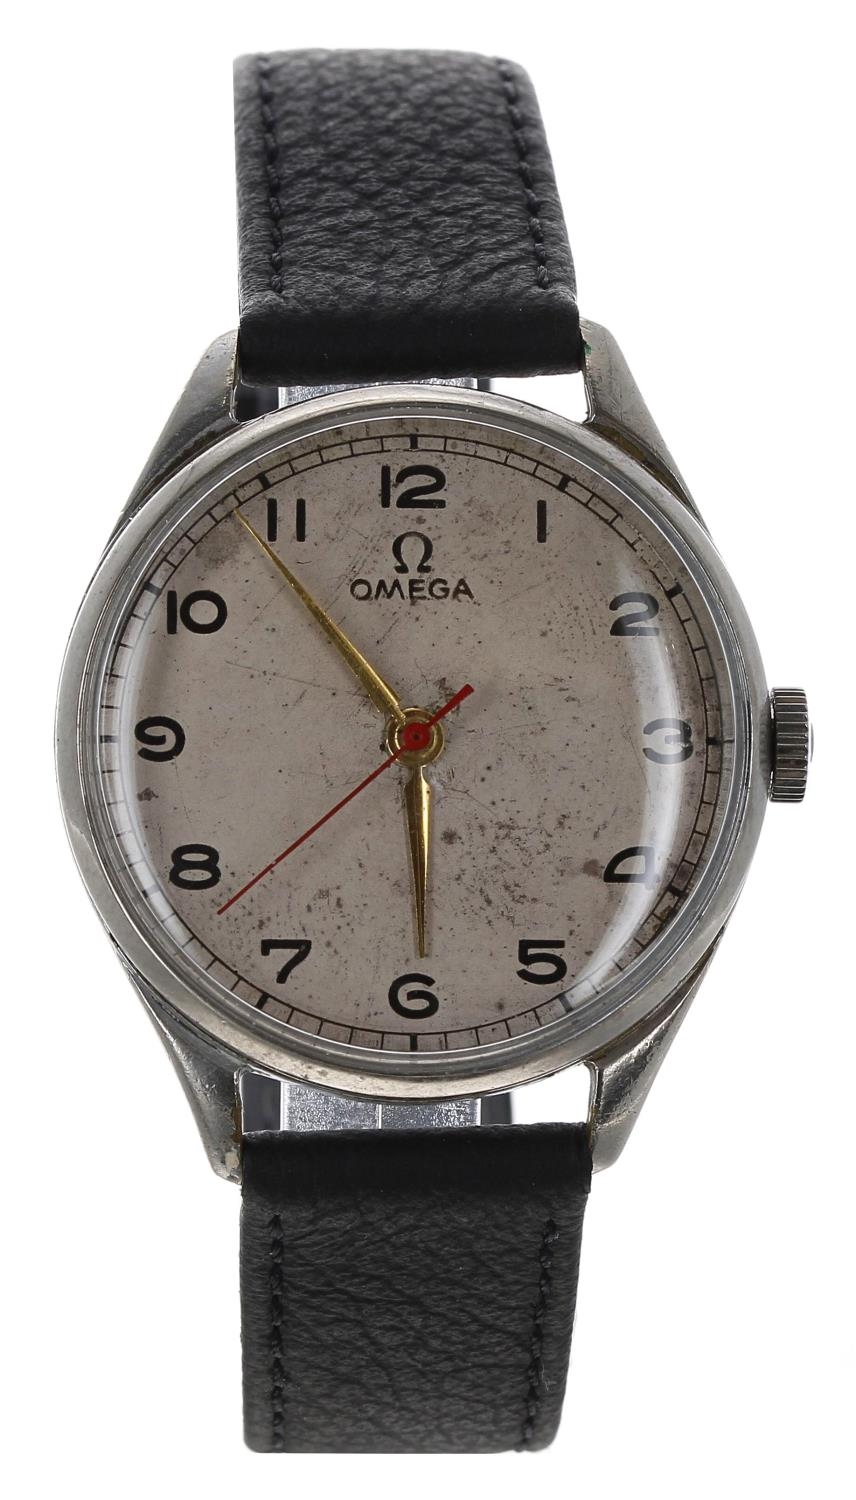 Omega nickel and stainless steel gentleman's wristwatch, case no. 10548334, serial no. 9779xxx,